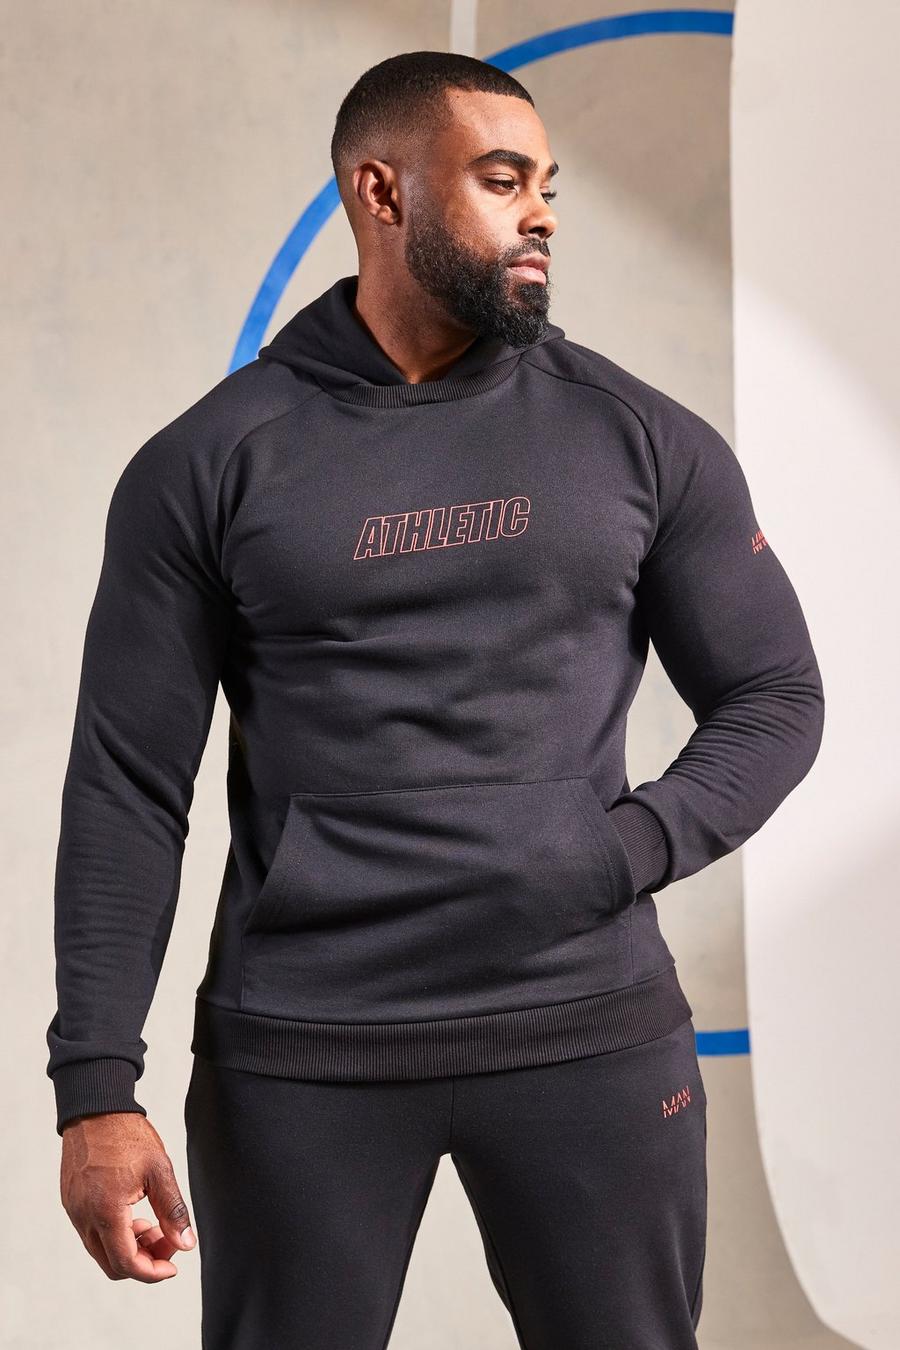 GYM REVOLUTION Men's Gym Muscle Long Sleeve Hoodies Workout Hooded Shirts Athletic Pullover Sweatshirt